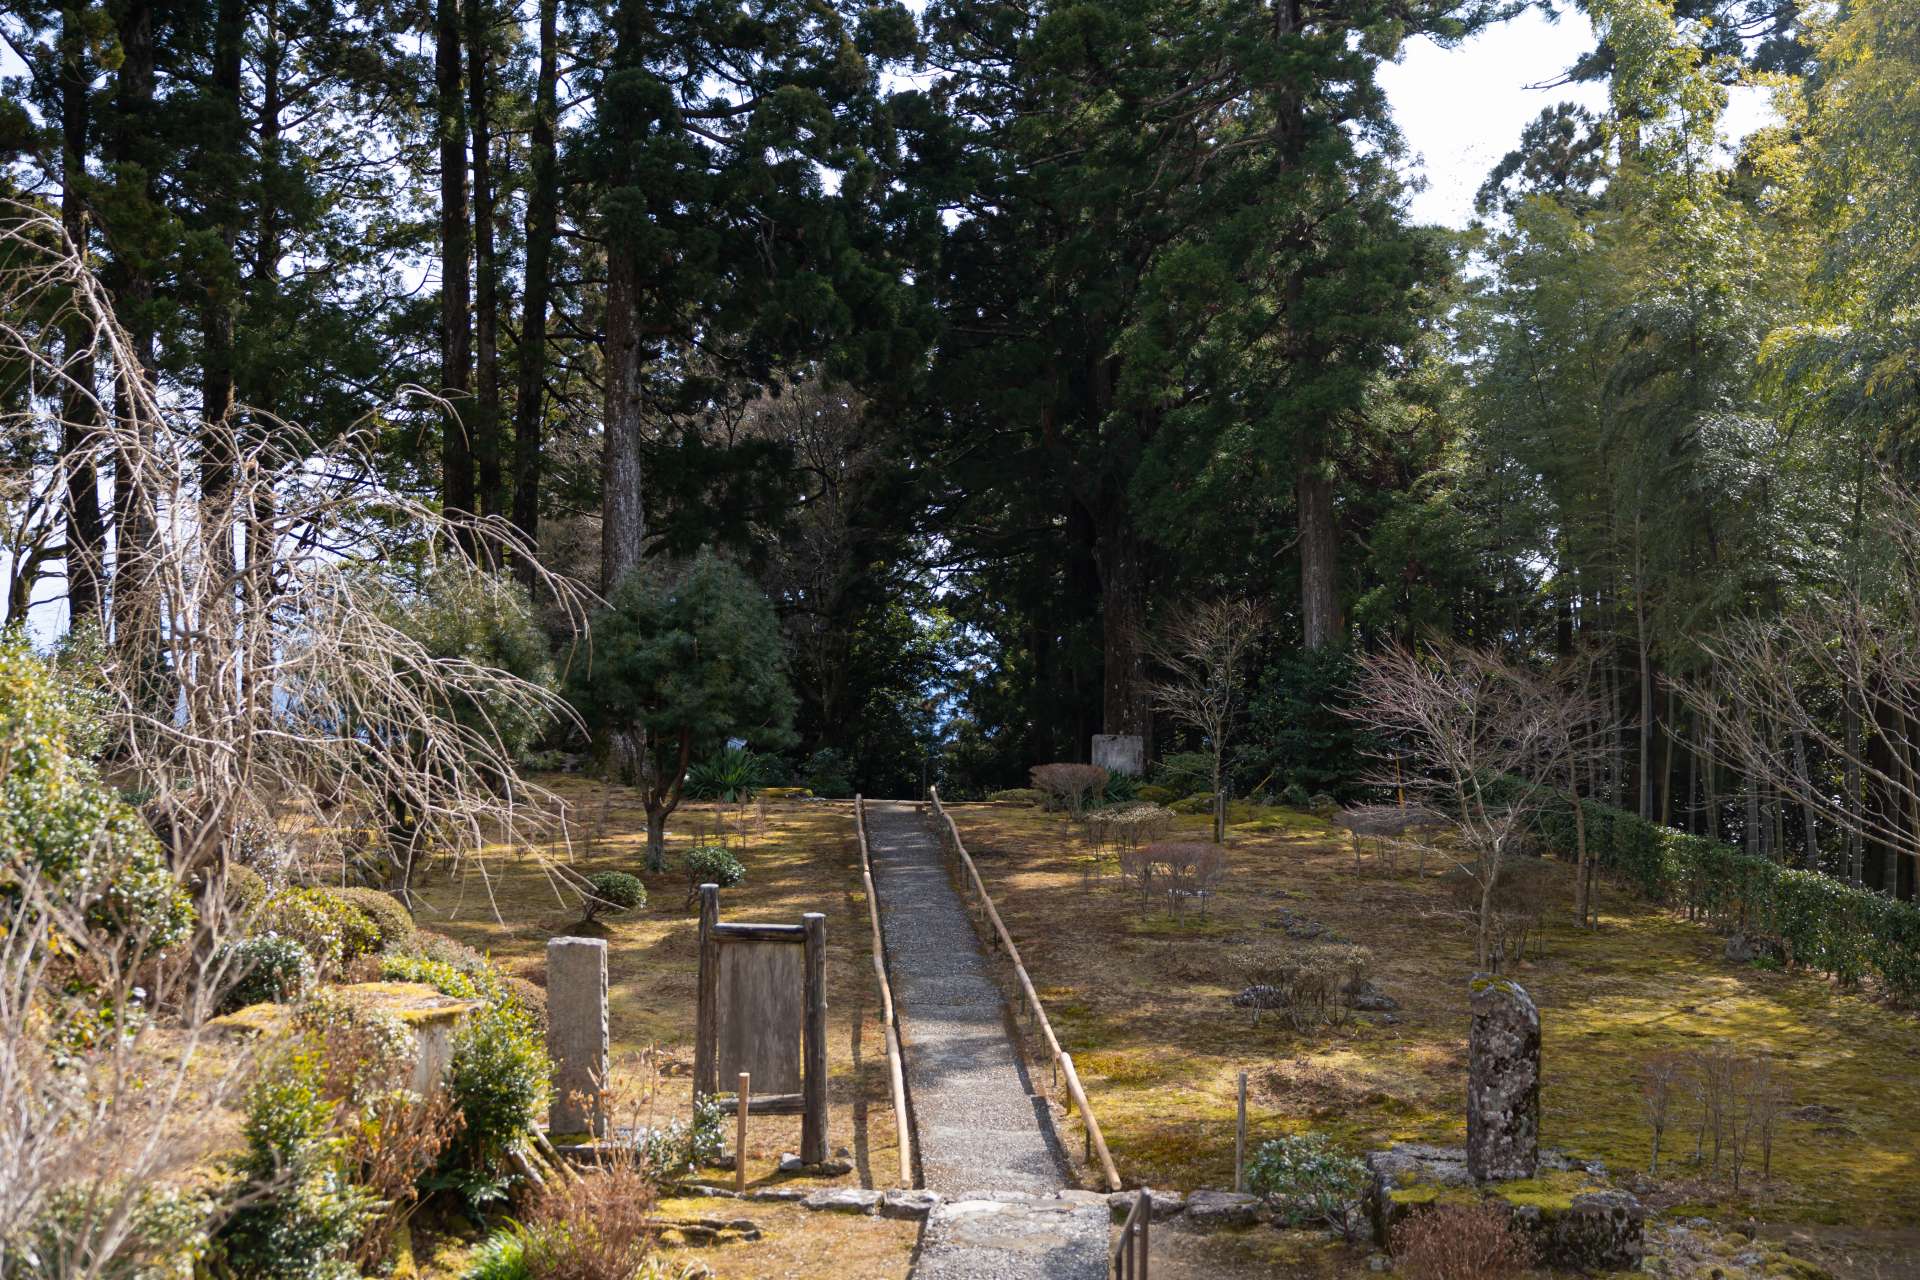 In spring, this garden is bright with flowers. Beyond the trees are magnificent views of the Kumano Sea.